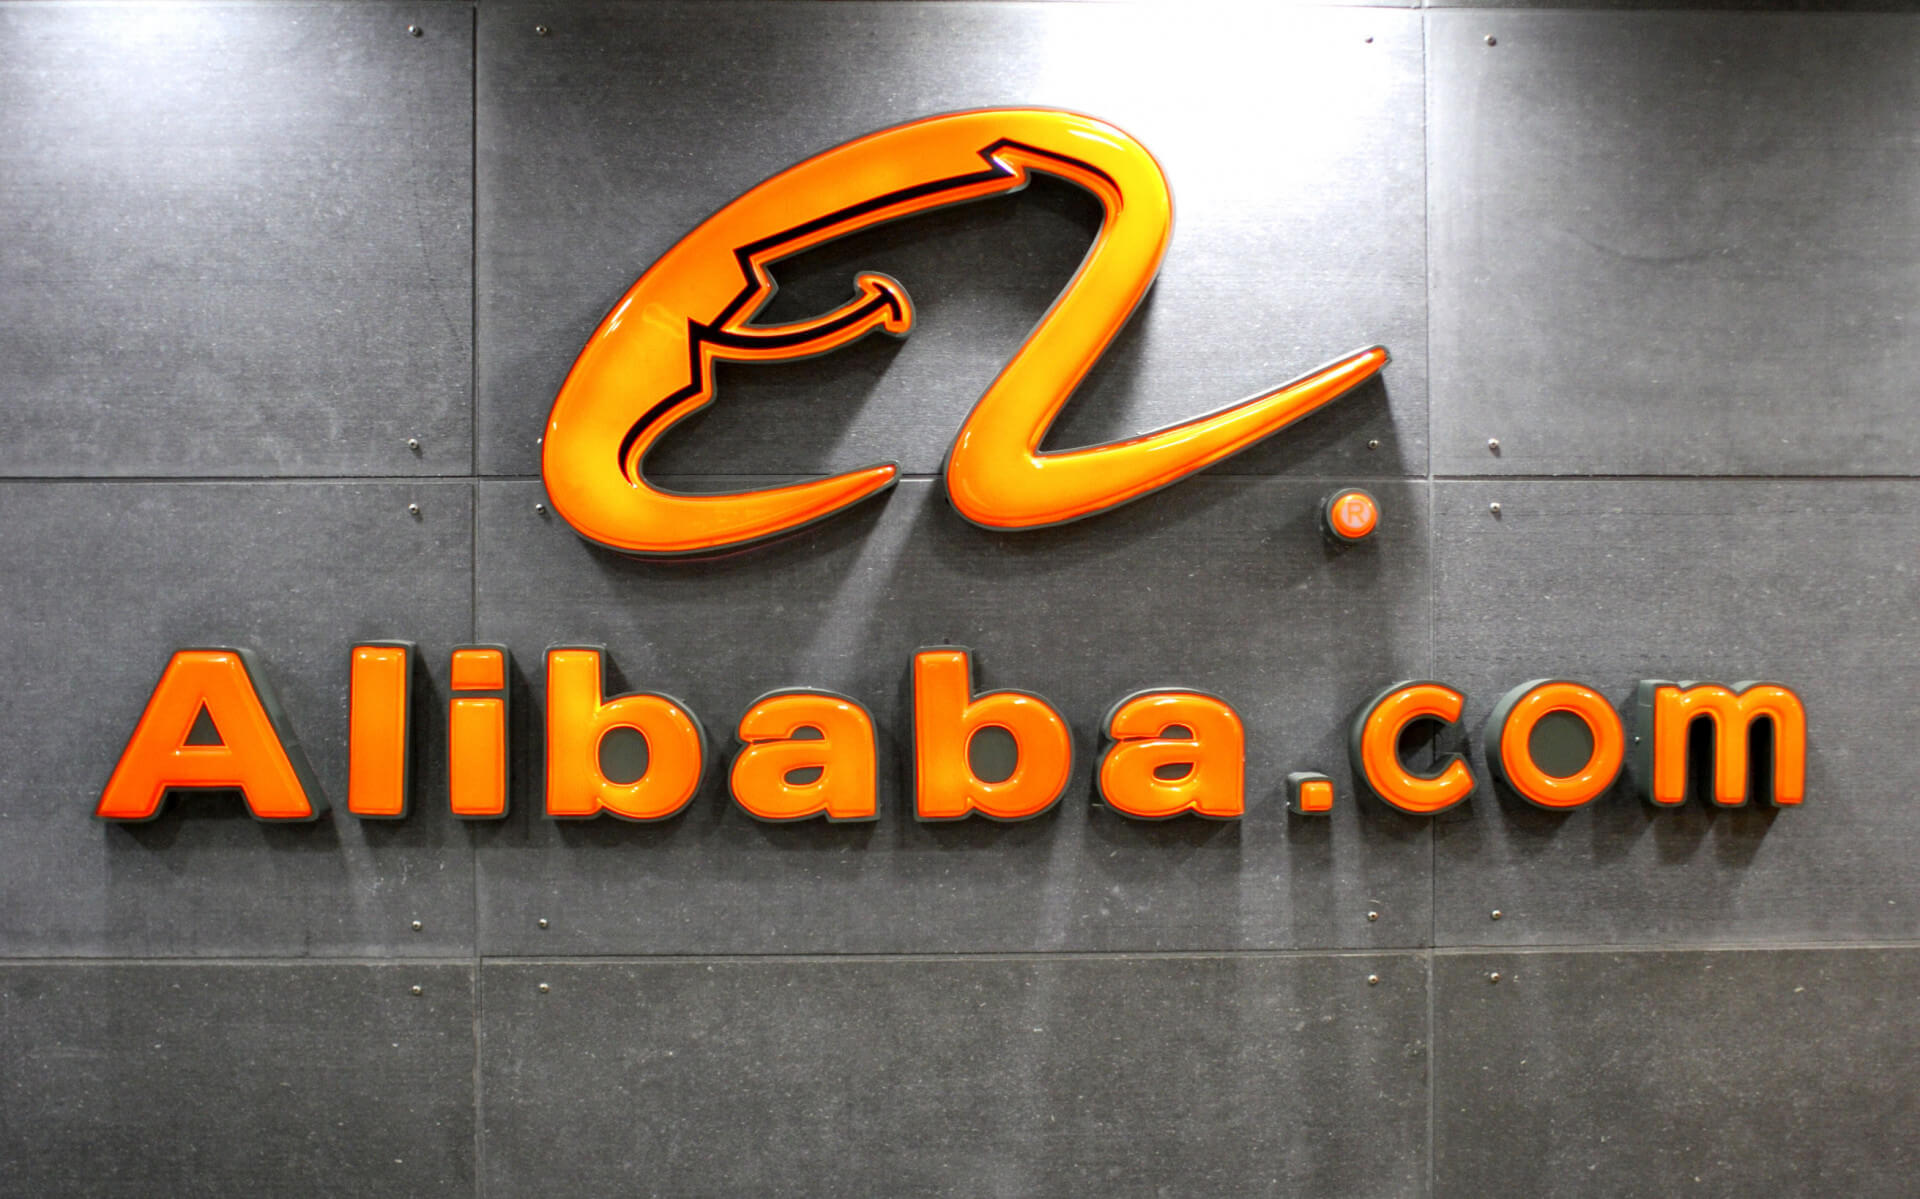 Is Alibaba Safe and Legit? | Alibaba Reviews (March 2023)